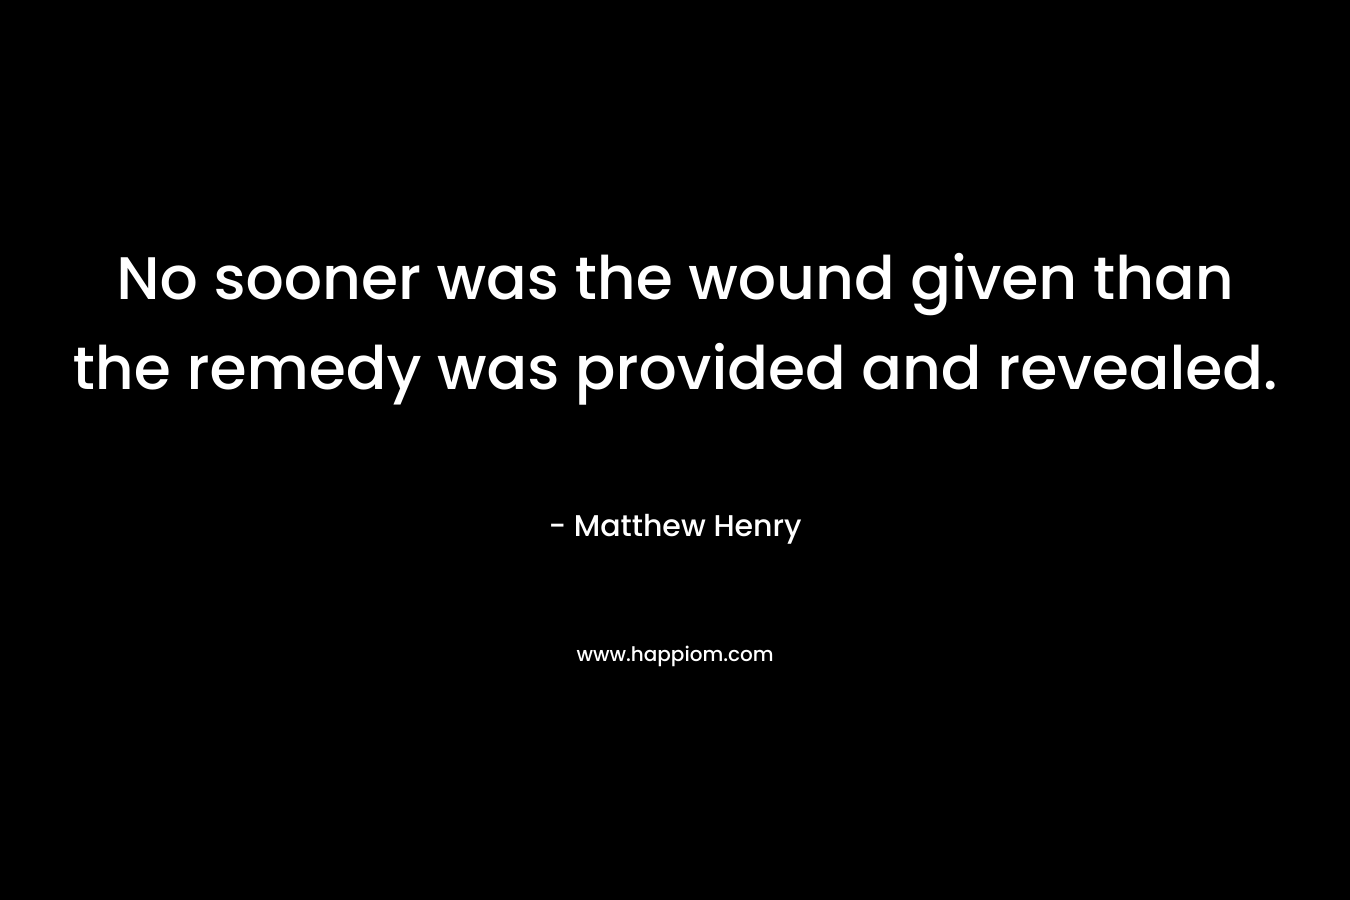 No sooner was the wound given than the remedy was provided and revealed. – Matthew Henry